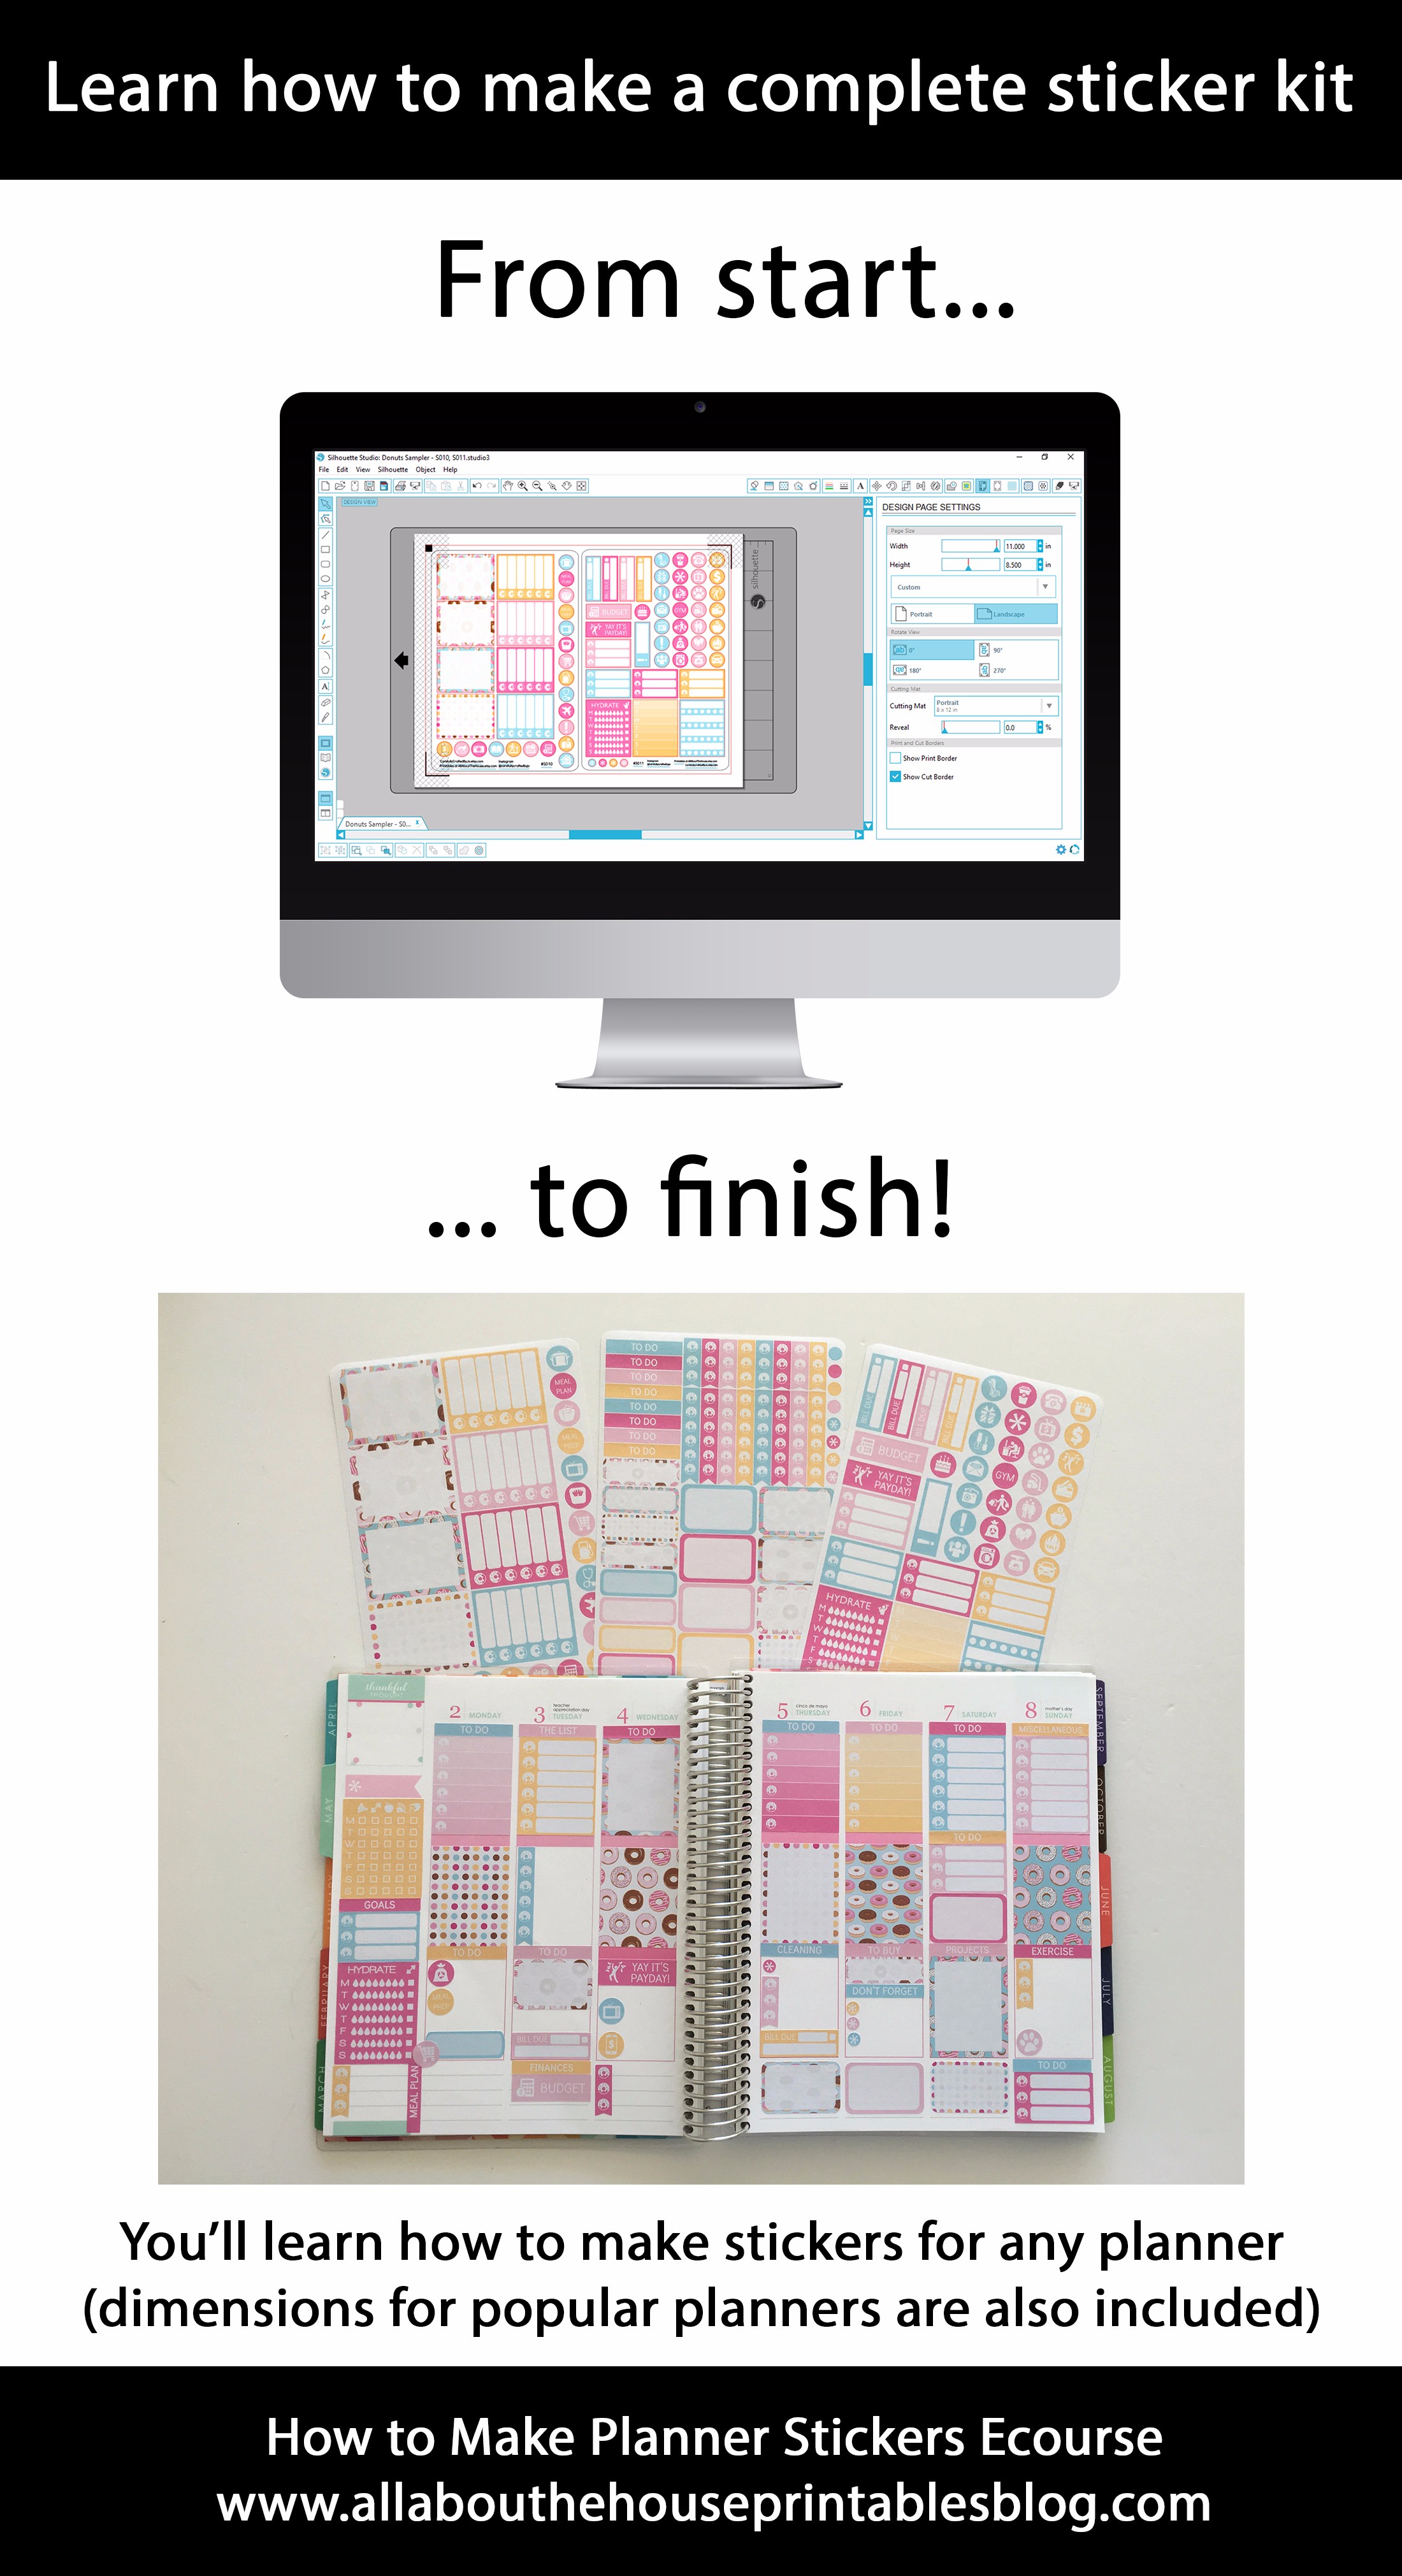 how to make a planner sticker kit tutorial silhouette studio free software without photoshop ecourse printable kiss cut blade settings erin condren happy planner full box checklist flag diy planner decorating